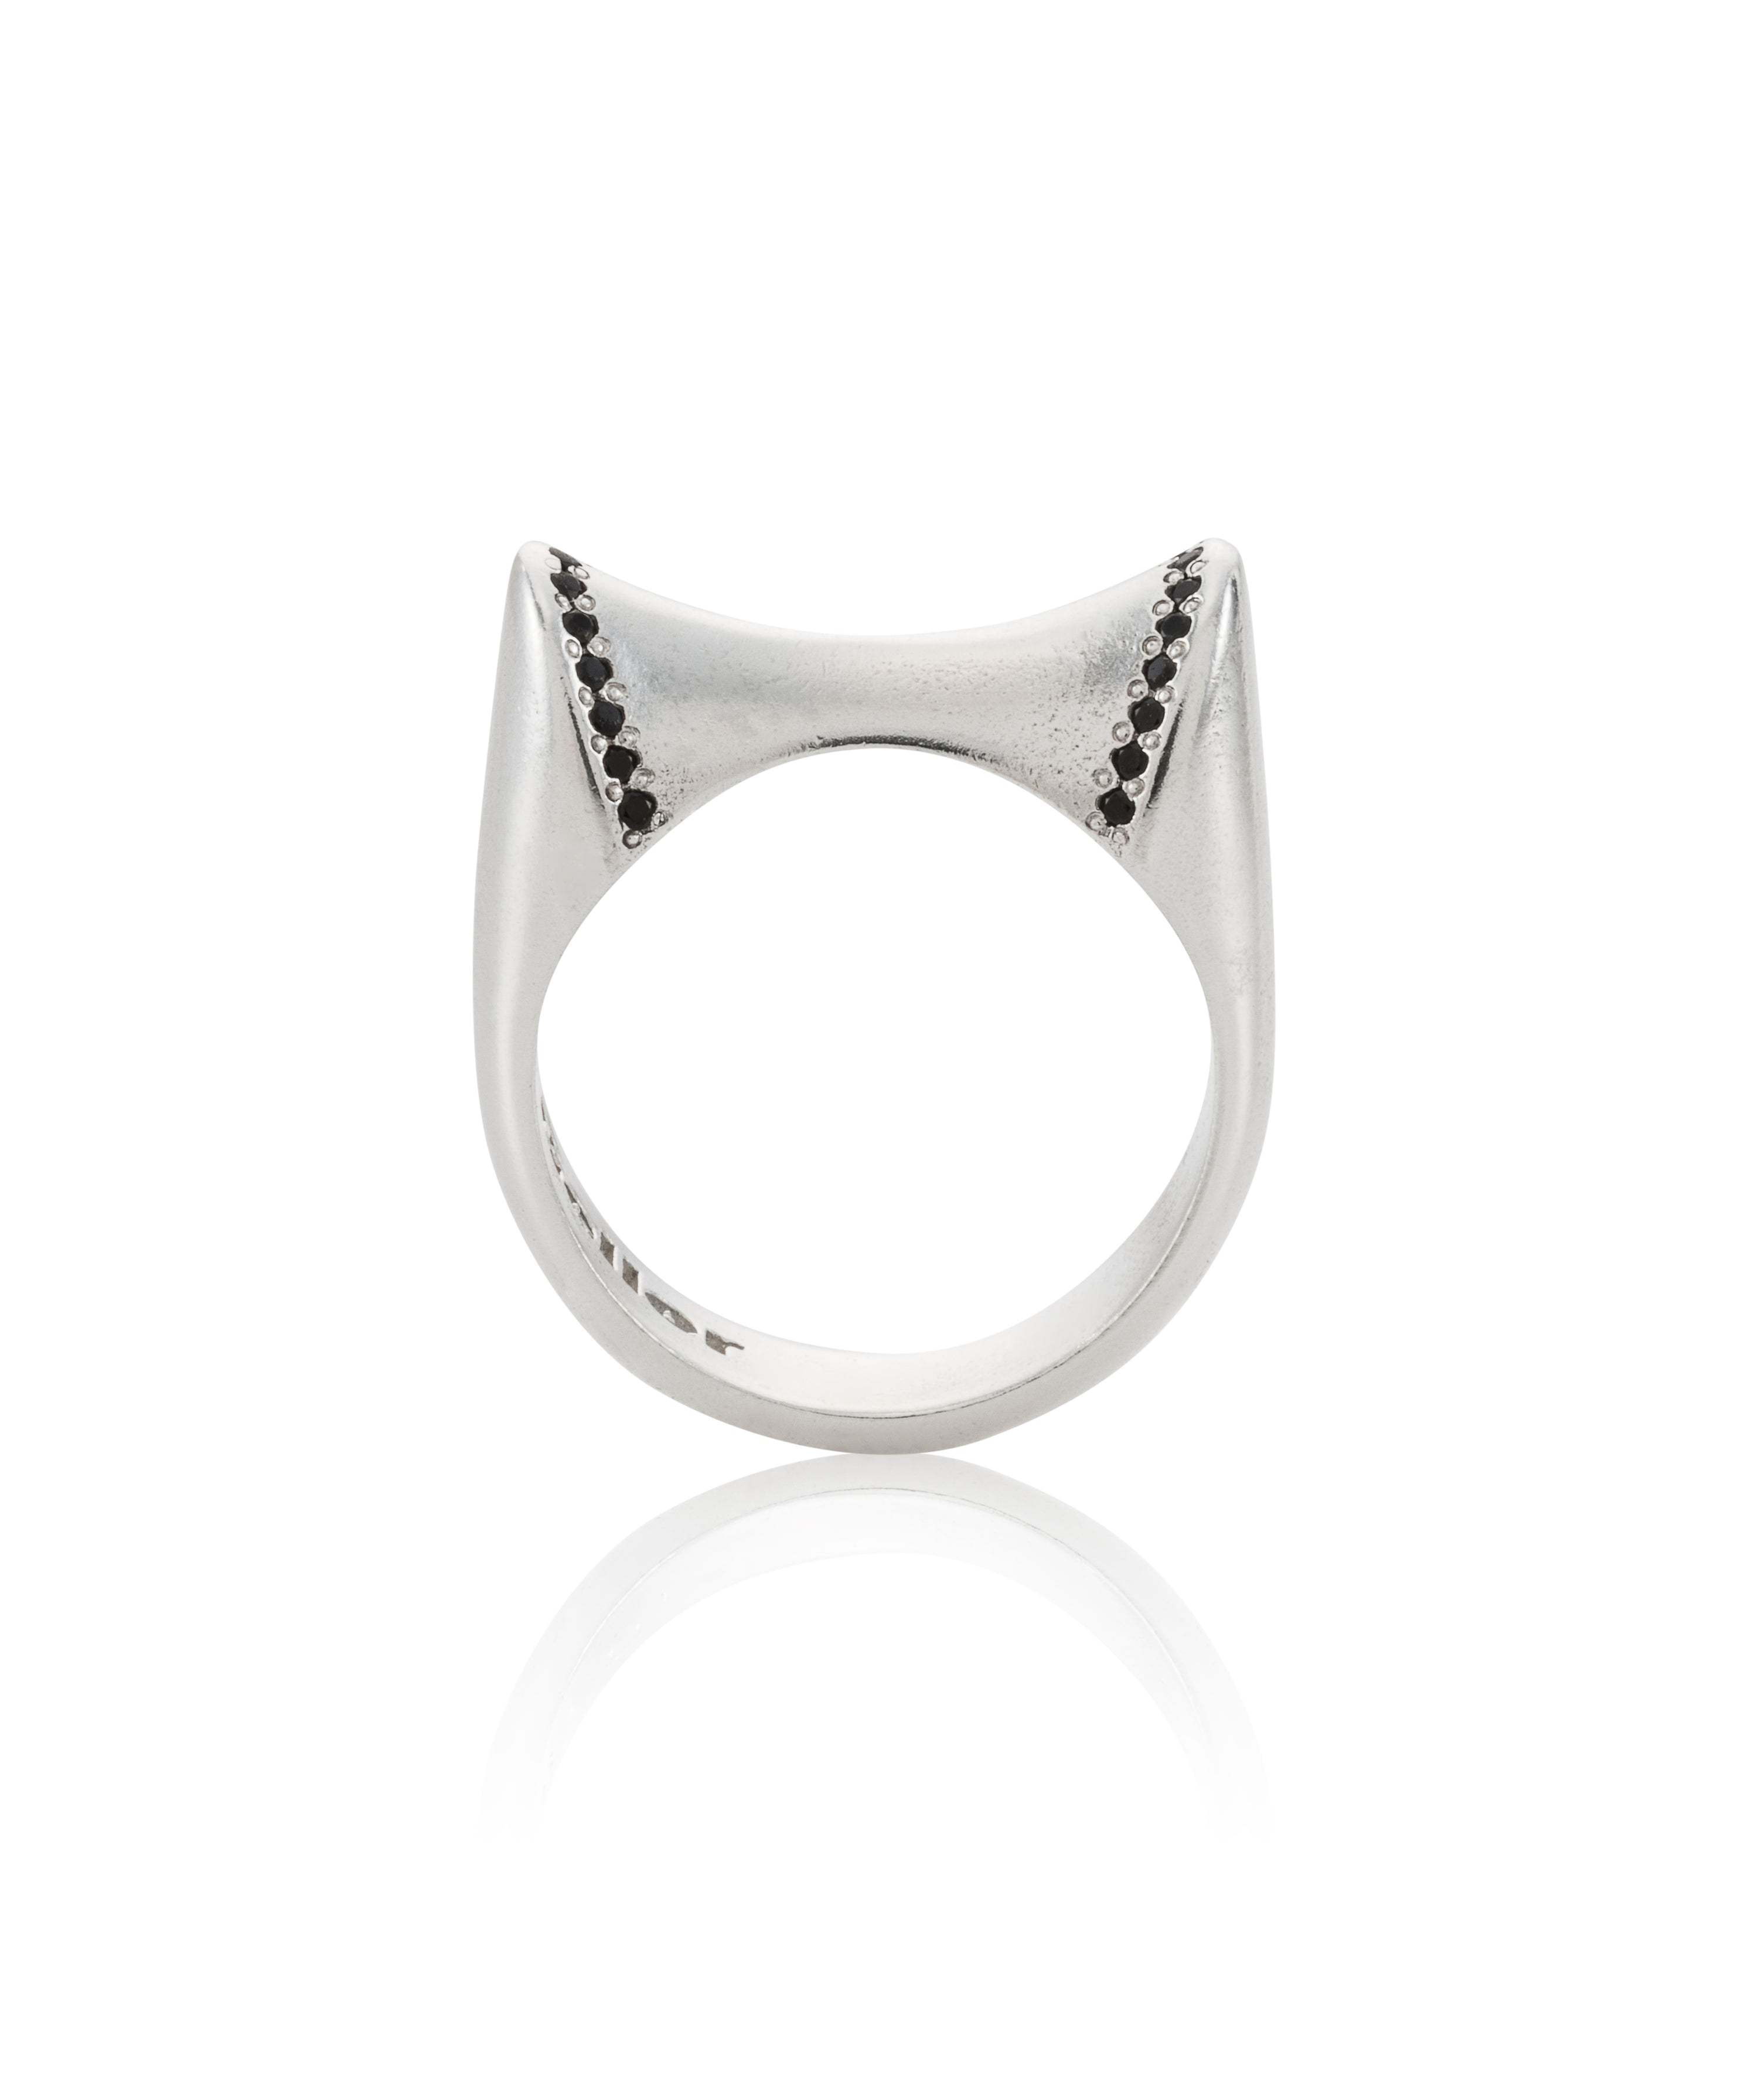 silver 2 peaks ring with black stones